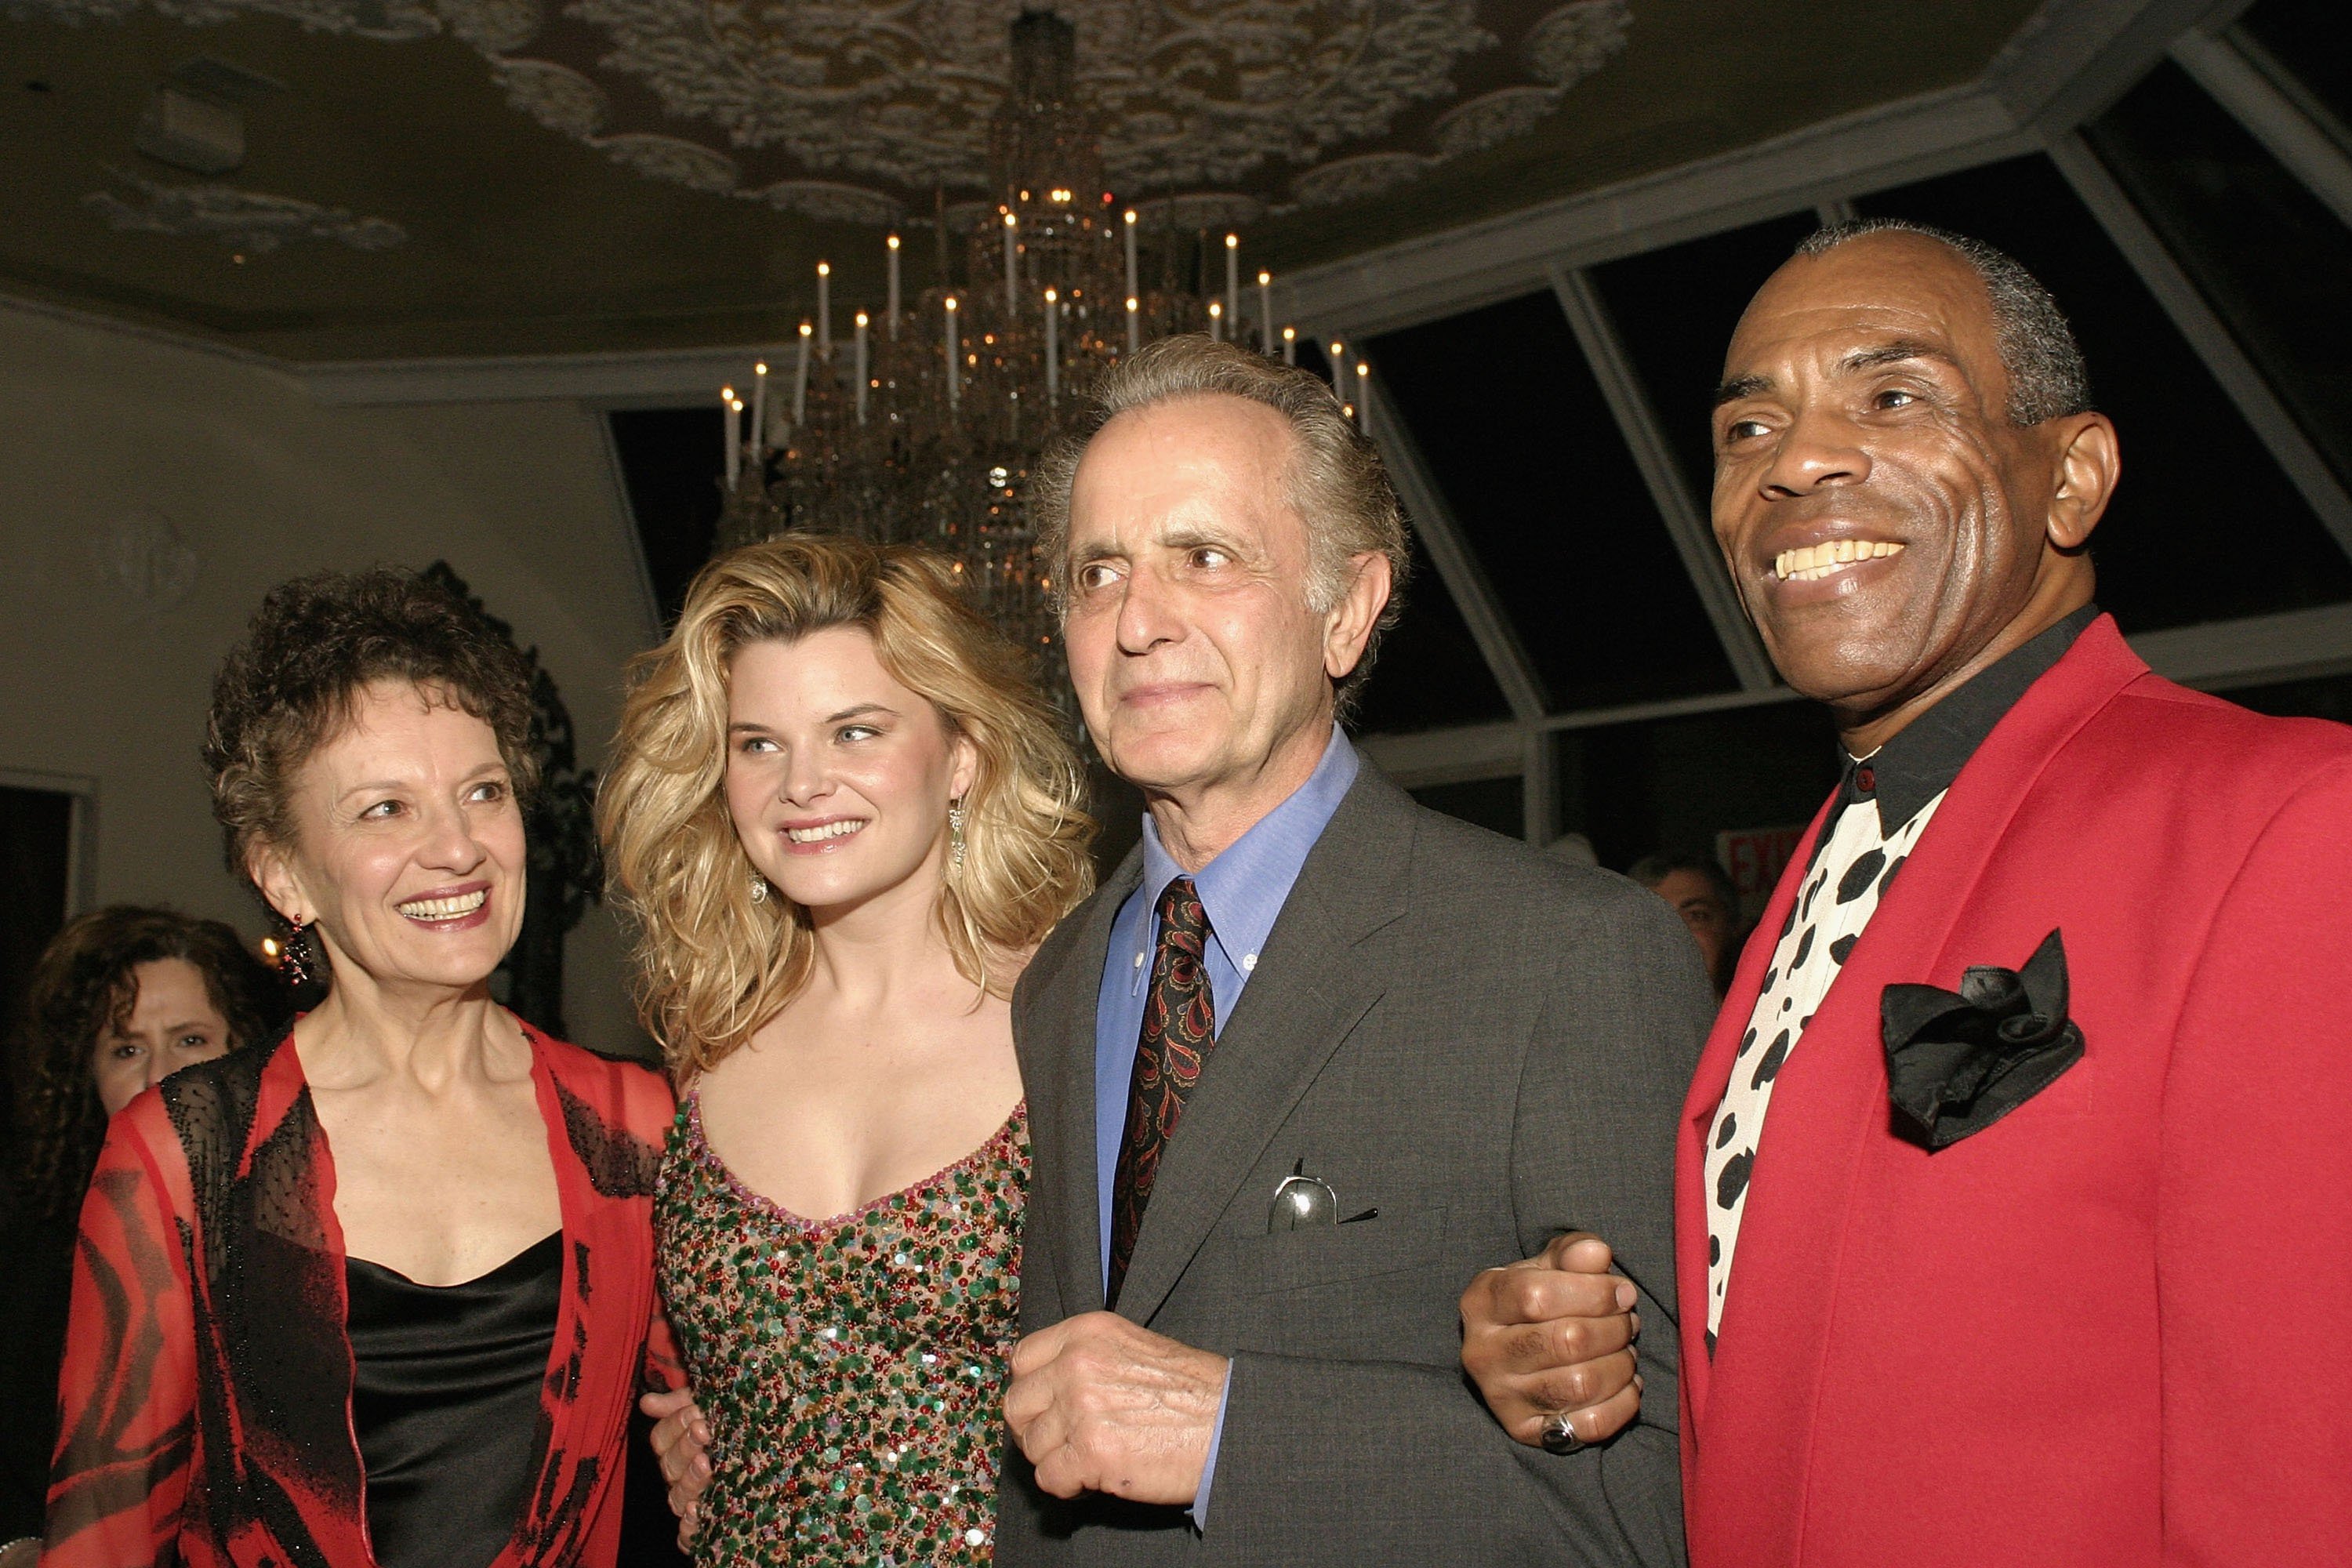 Phyllis Frelich, Heather Tom, playwrite Mark Medoff and Andre De Shields at the after party of "Prymate" in New York. Photo: Getty Images/GlobalImagesUkraine